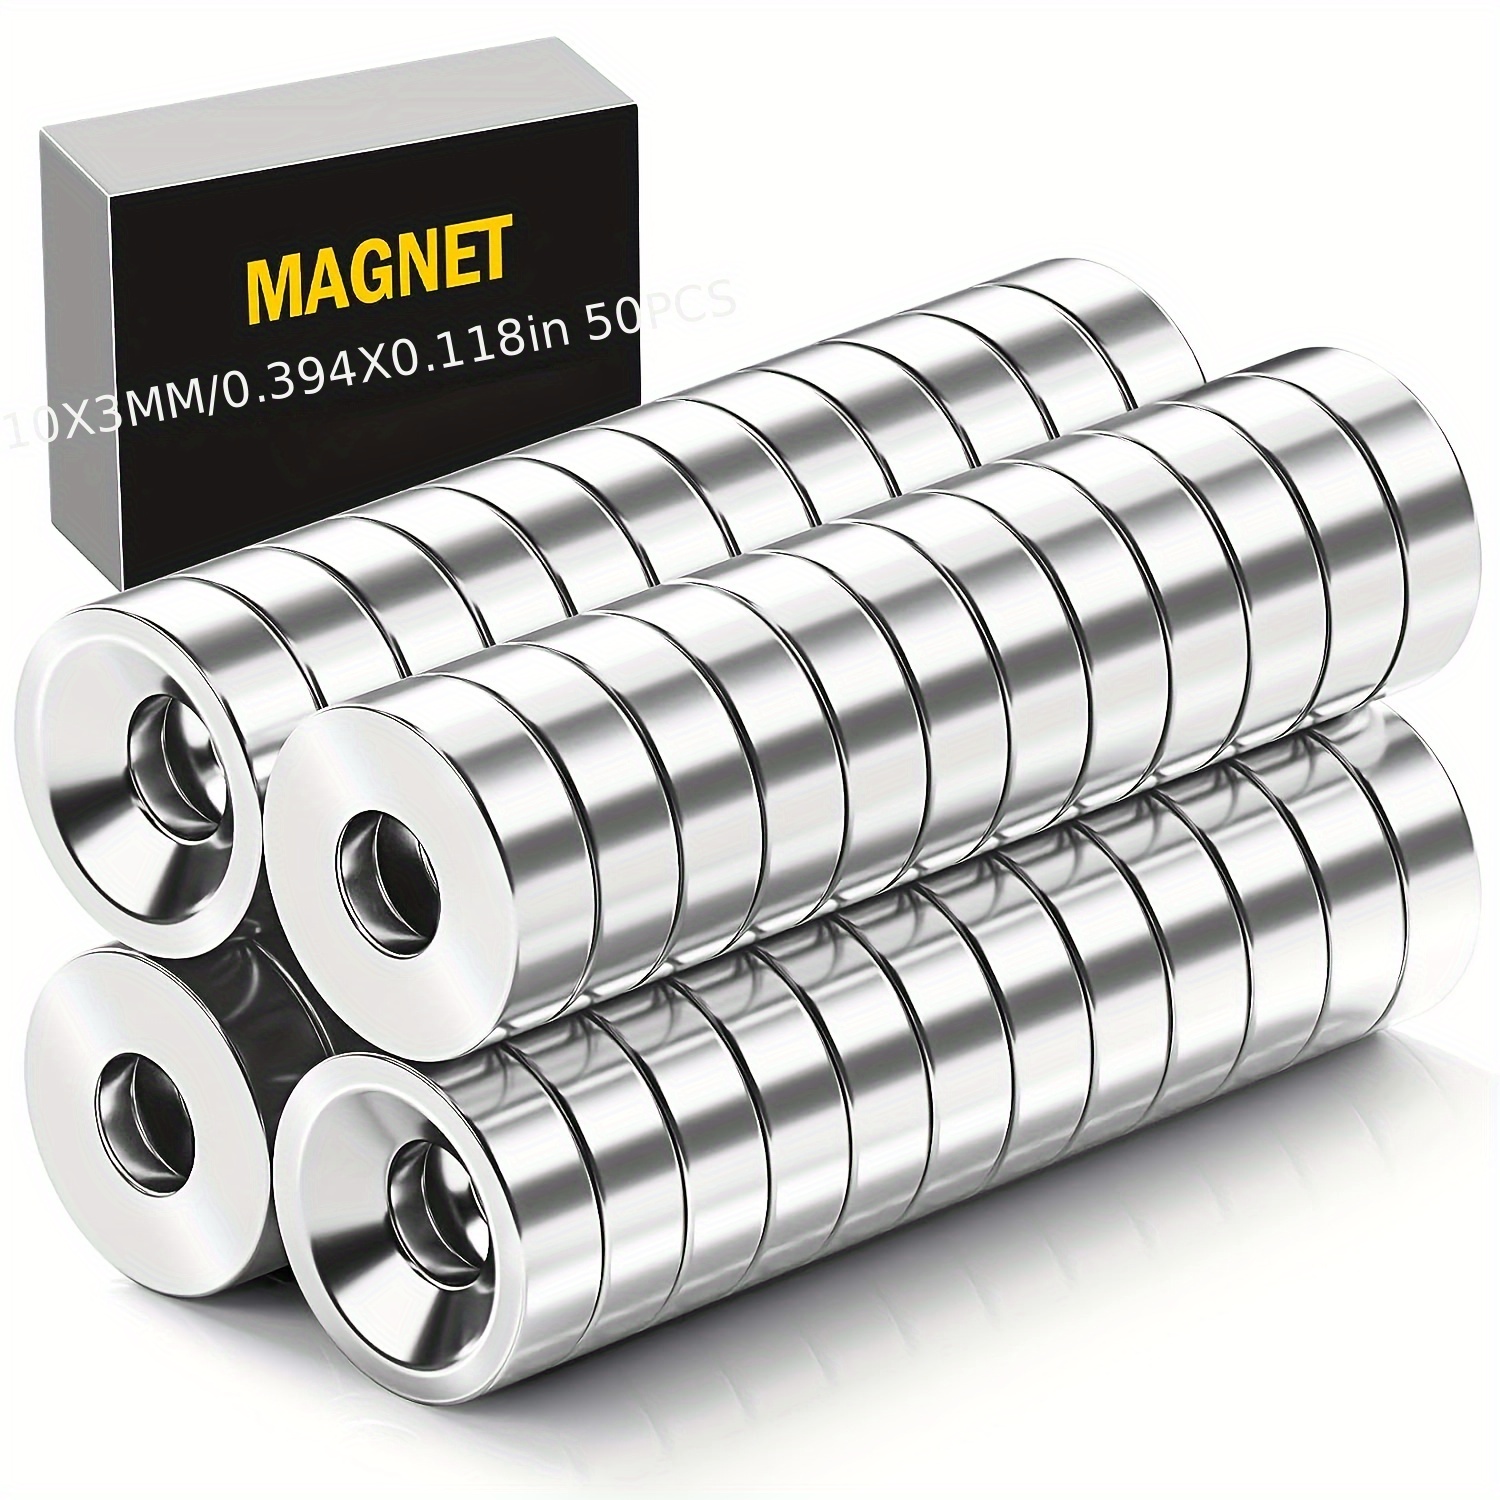 20pcs of Super Strong Neodymium Magnets - 10x2mm - Perfect for